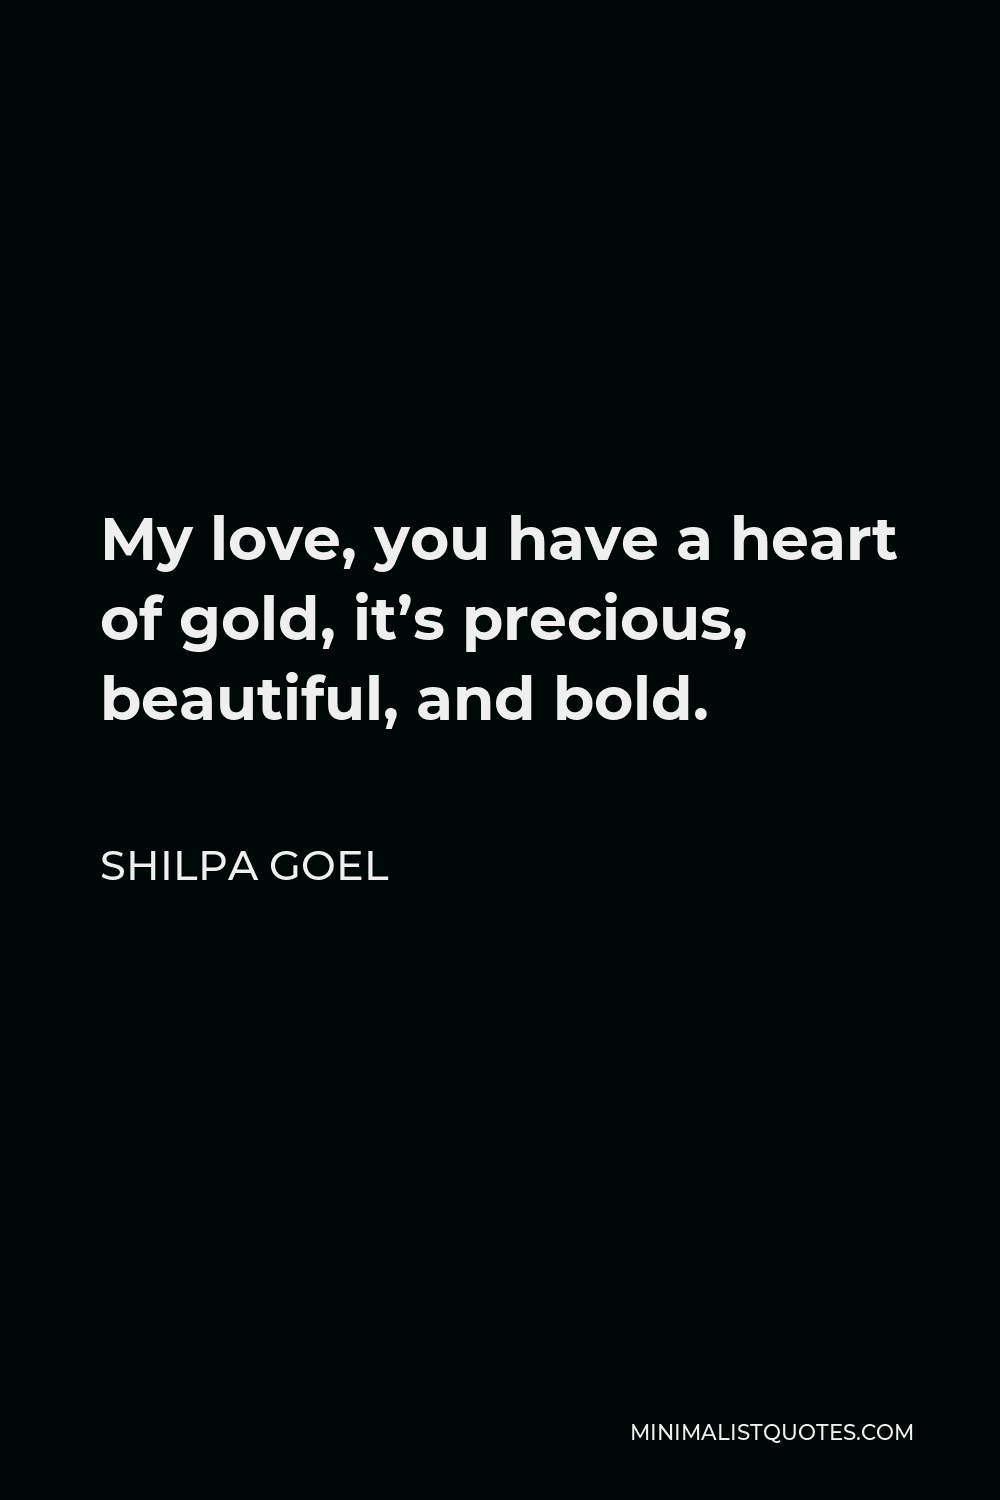 Shilpa Goel Quote - My love, you have a heart of gold, it’s precious, beautiful, and bold.